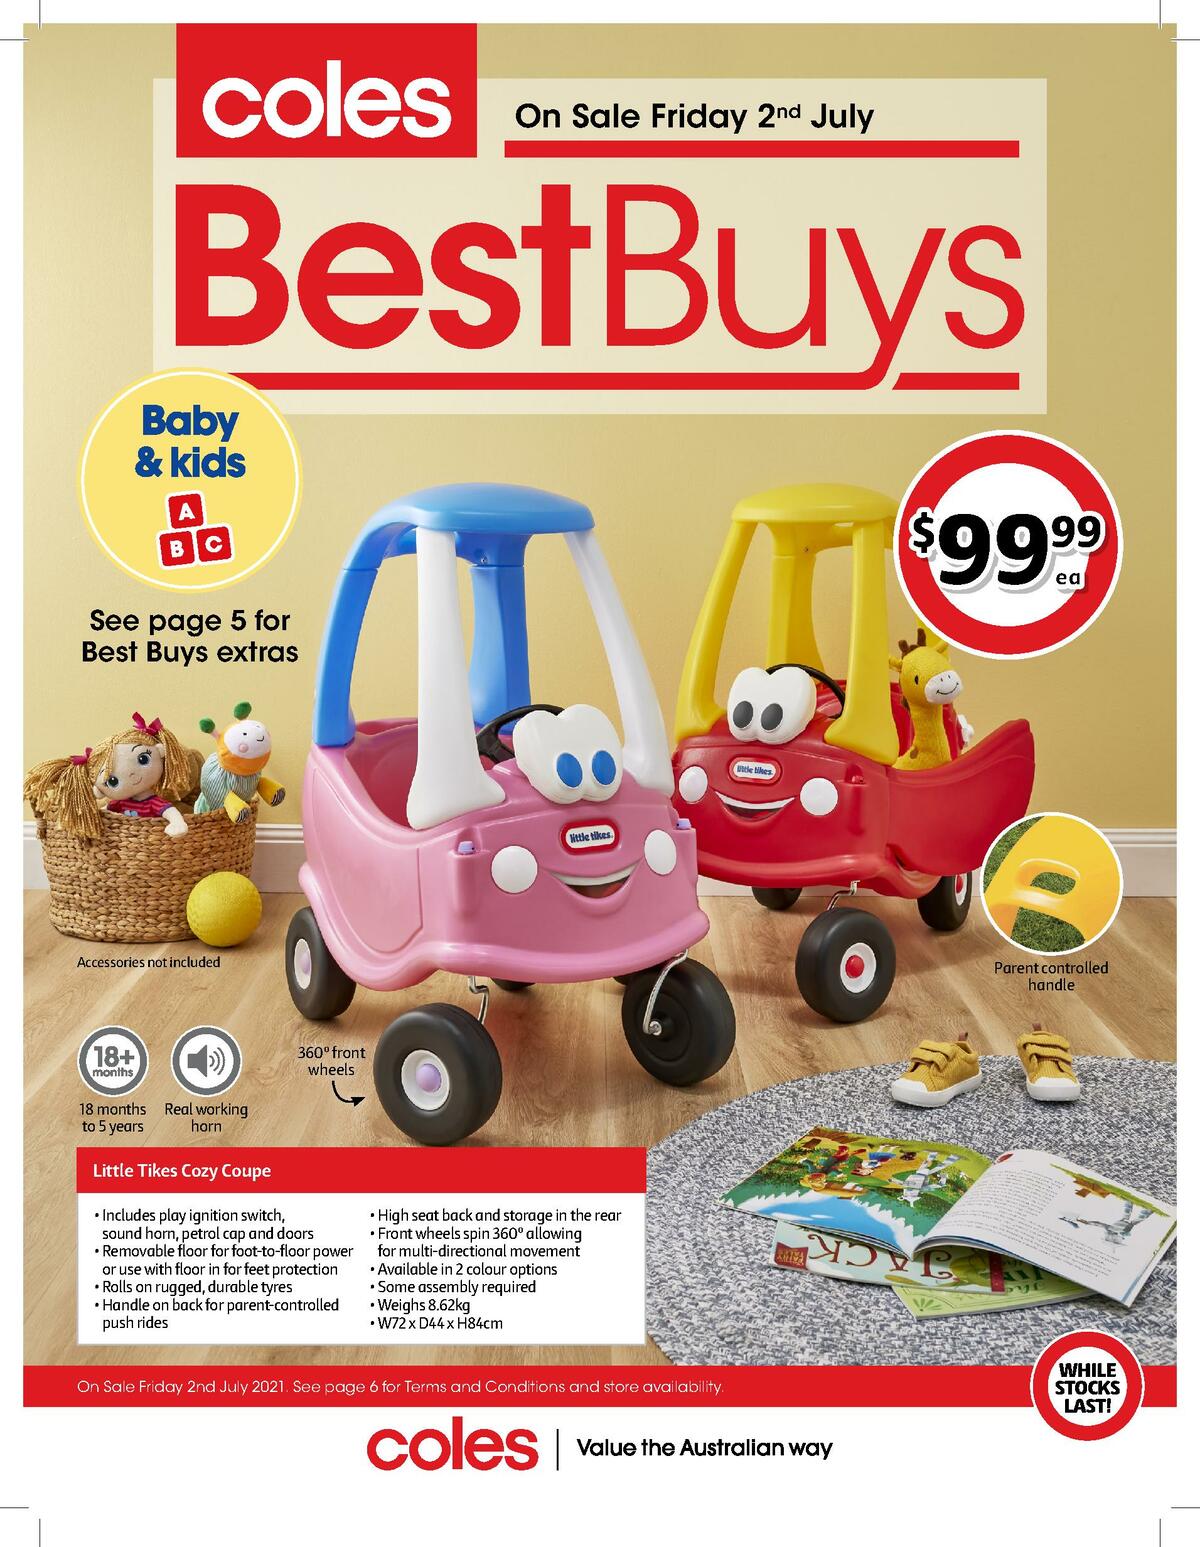 Coles Best Buys - Baby & Kids Catalogues from 2 July